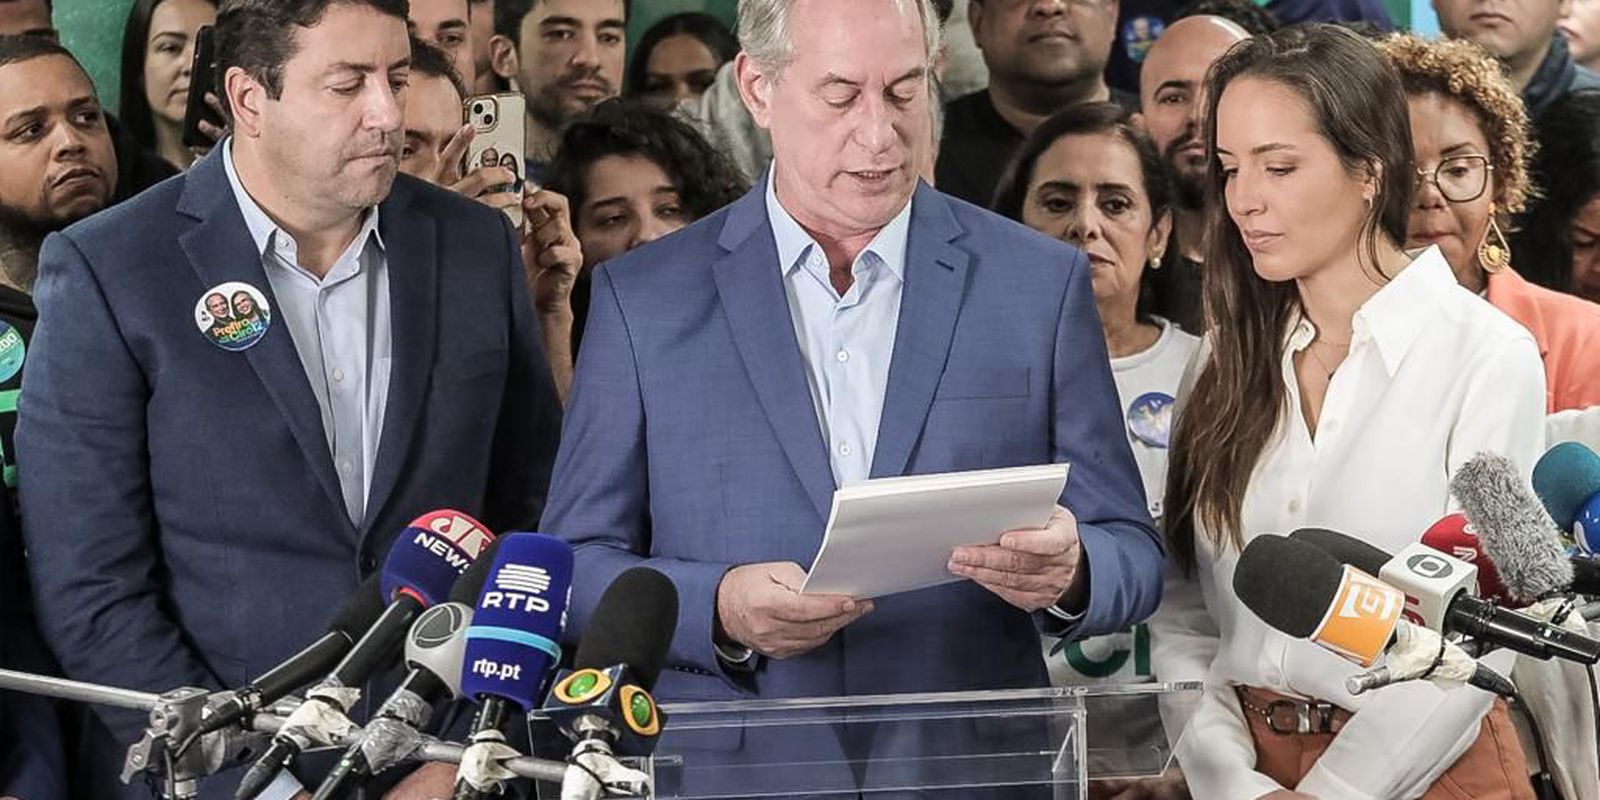 Ciro Gomes says he will continue with his candidacy until the end of the election